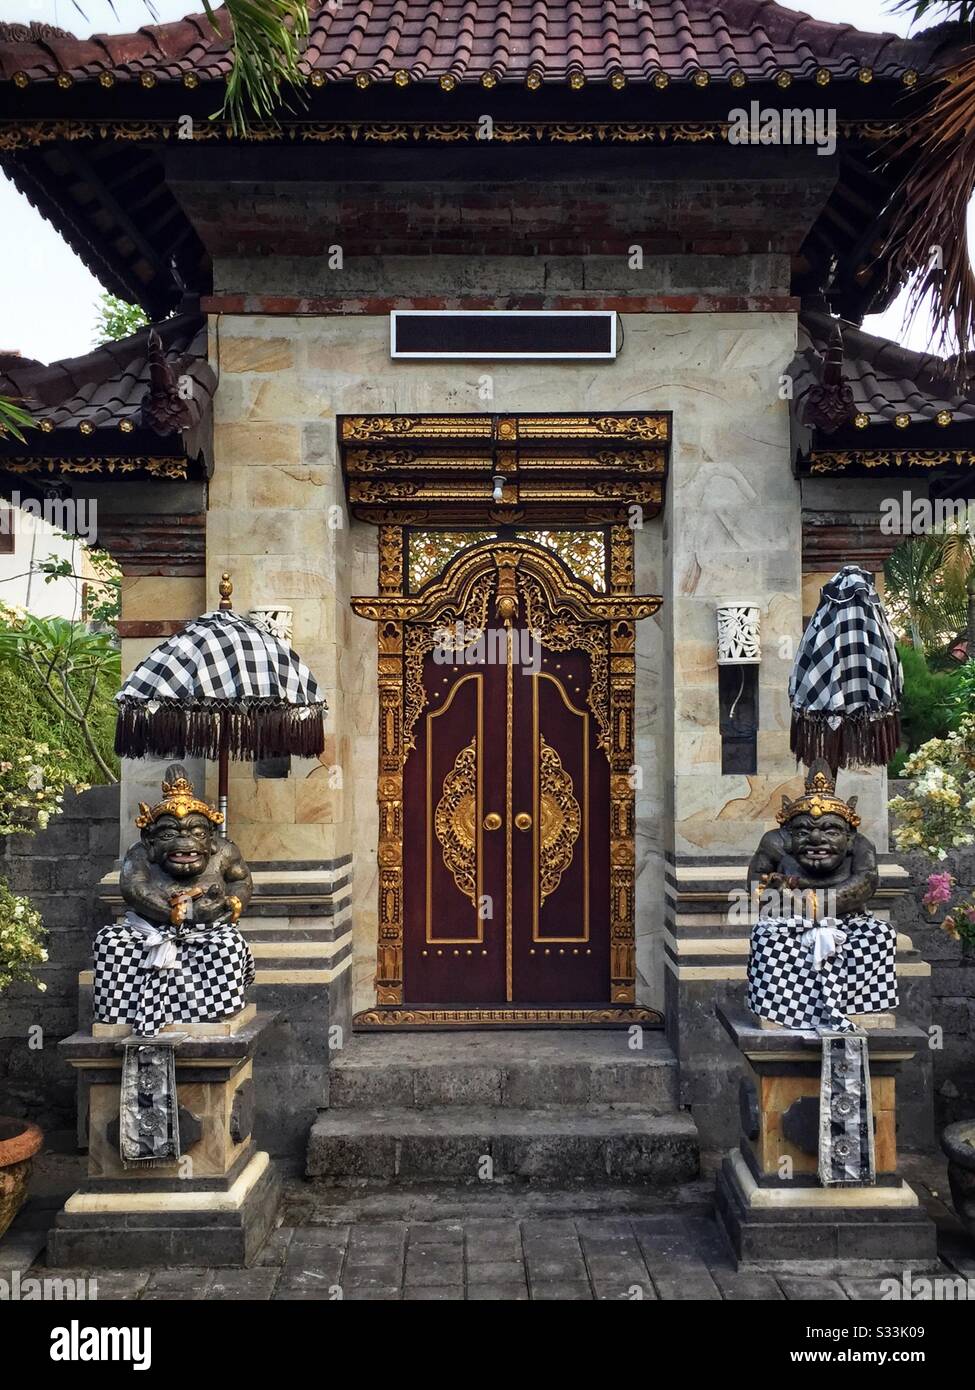 The ornate entrance to a modern residential house compound in Candidasa,  Bali, Indonesia Stock Photo - Alamy